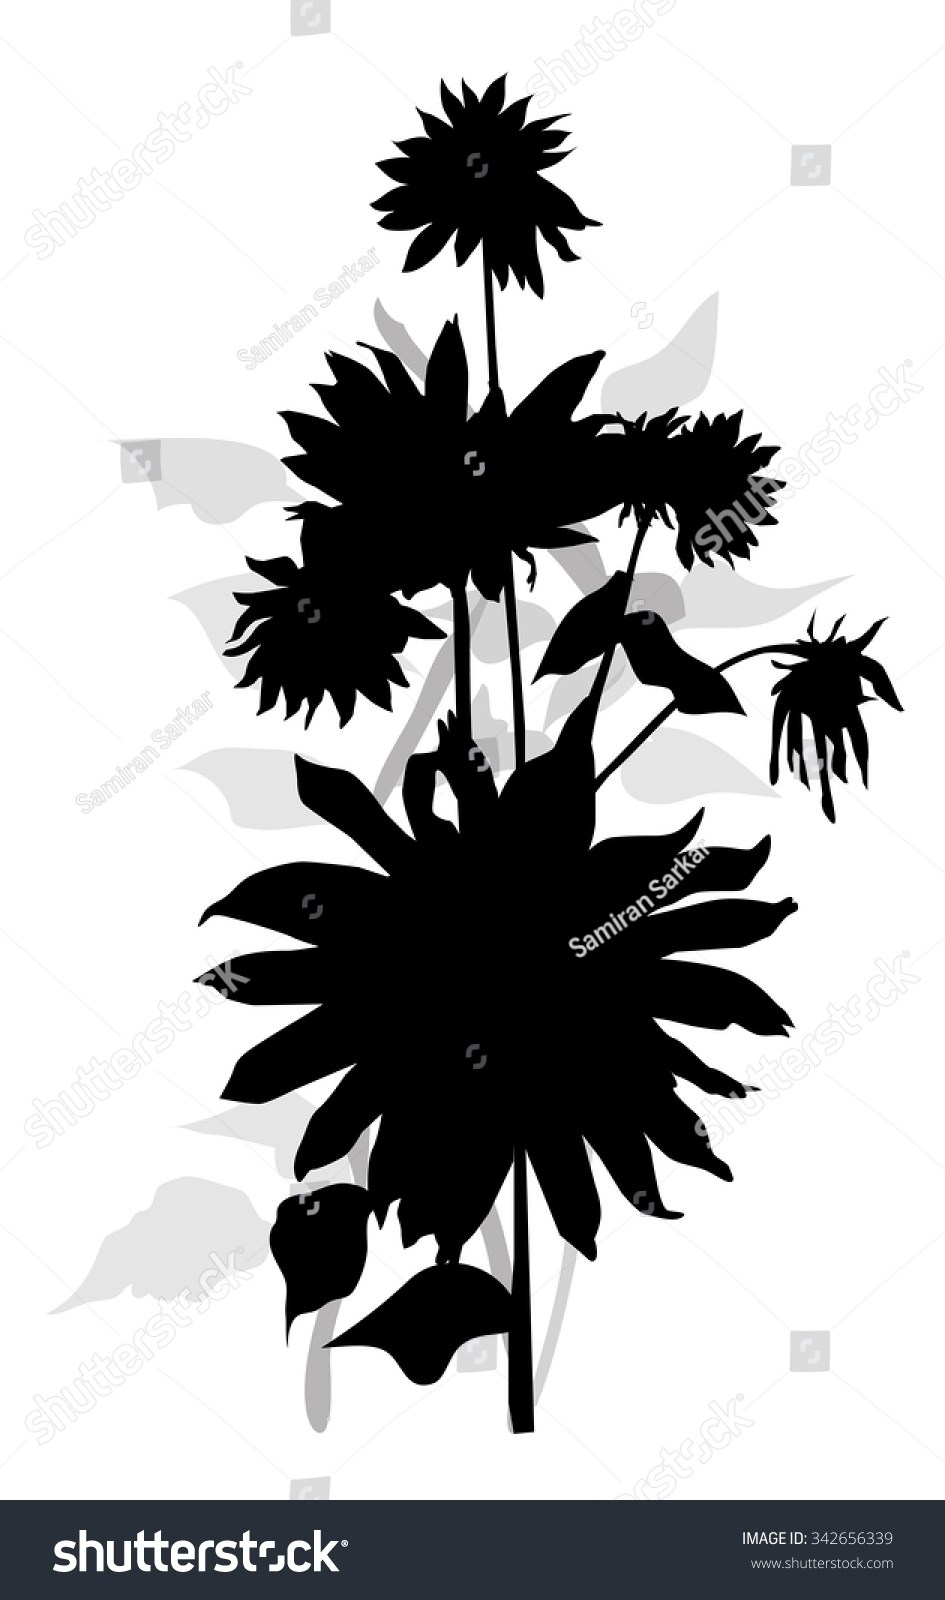 Download Sunflower Silhouette Vector at Vectorified.com ...